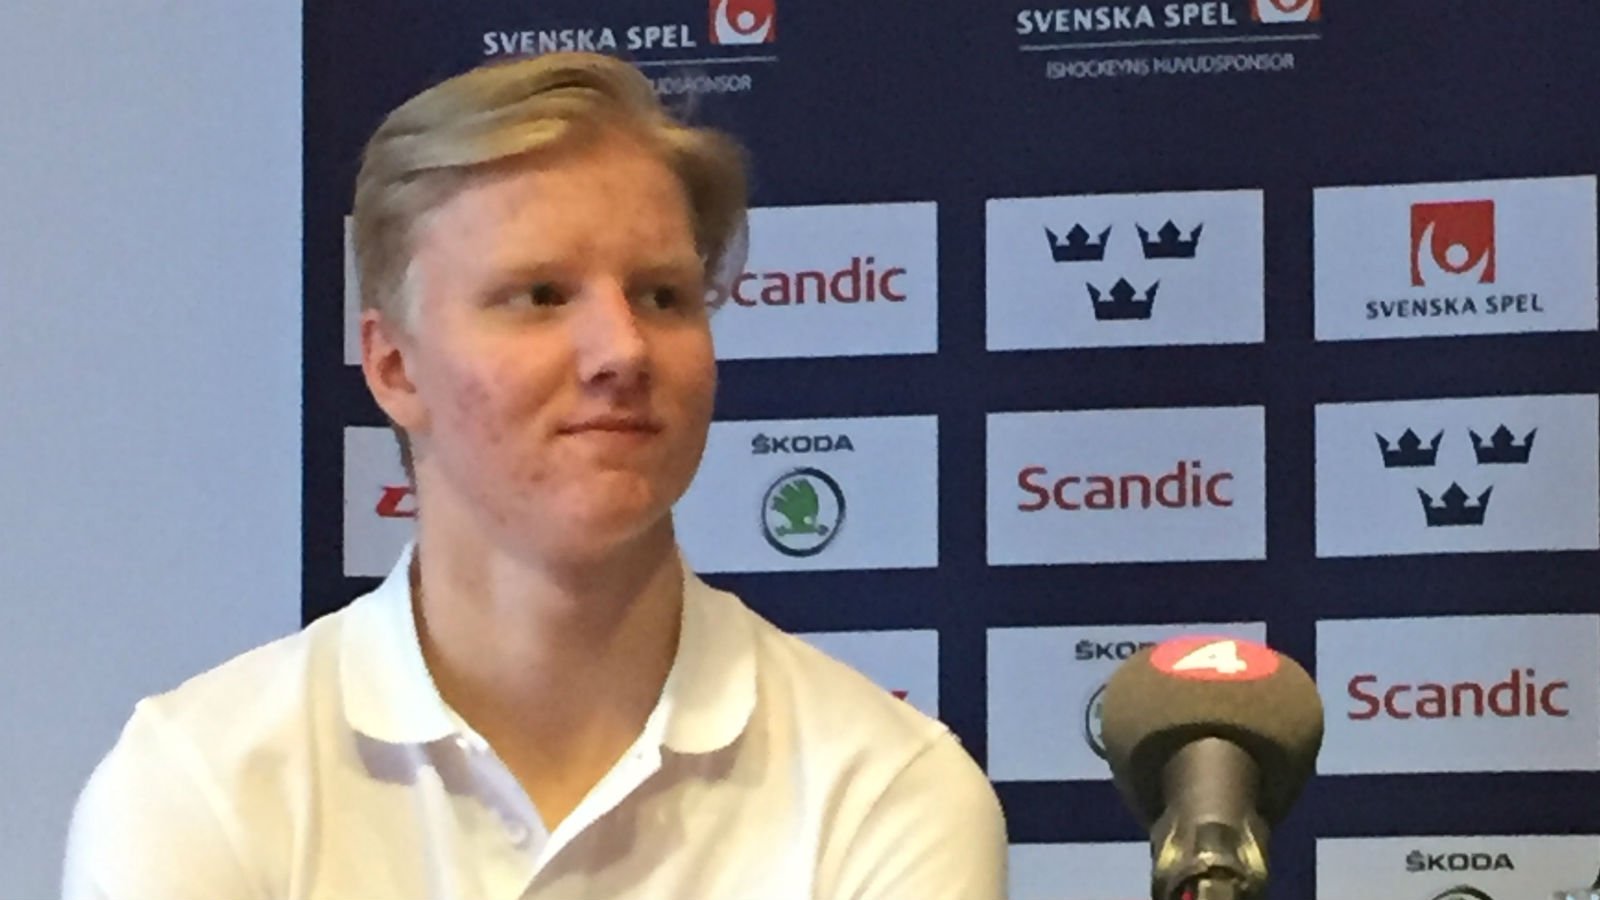 Uffe Bodin on Twitter: "There aren't too many 17 year-olds who get their  own press conference, but Rasmus Dahlin is not your average 17 year-old:  https://t.co/RSL2g5kxrm #WJC2018 #NHLprospect #RasmusDahlin  https://t.co/YuIUT47A3k" / Twitter